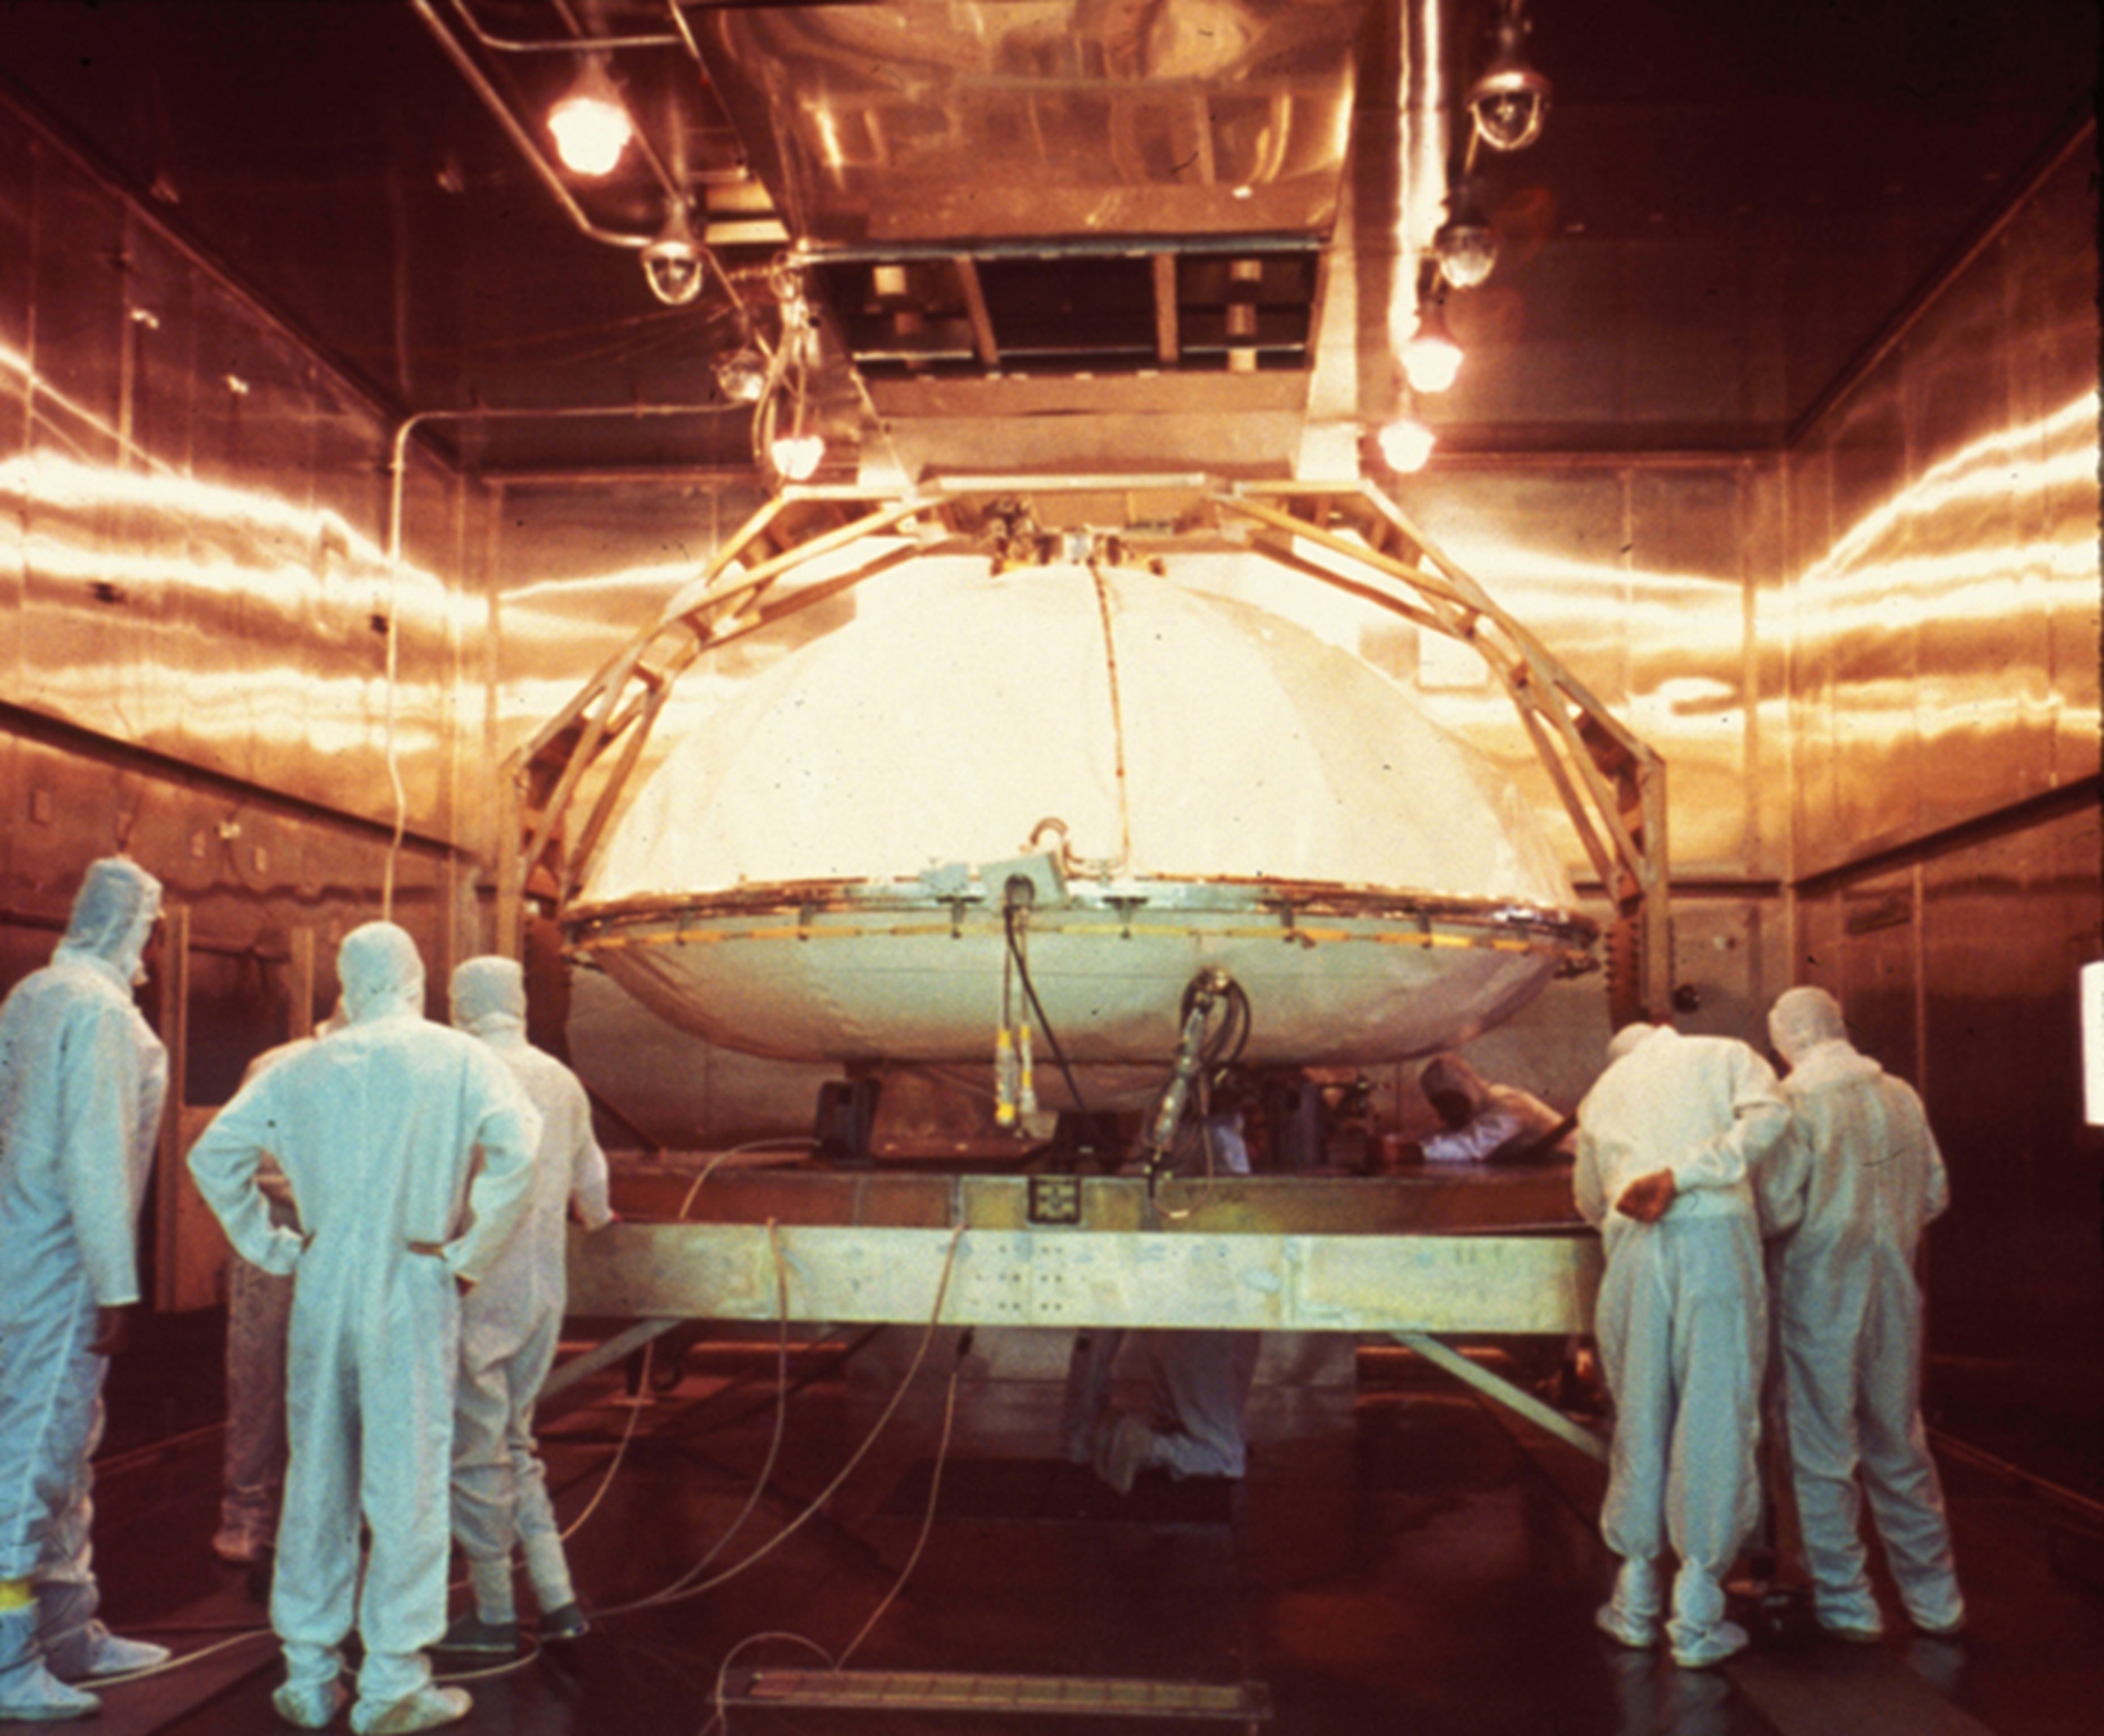 A Viking lander and scientists in a cleanroom